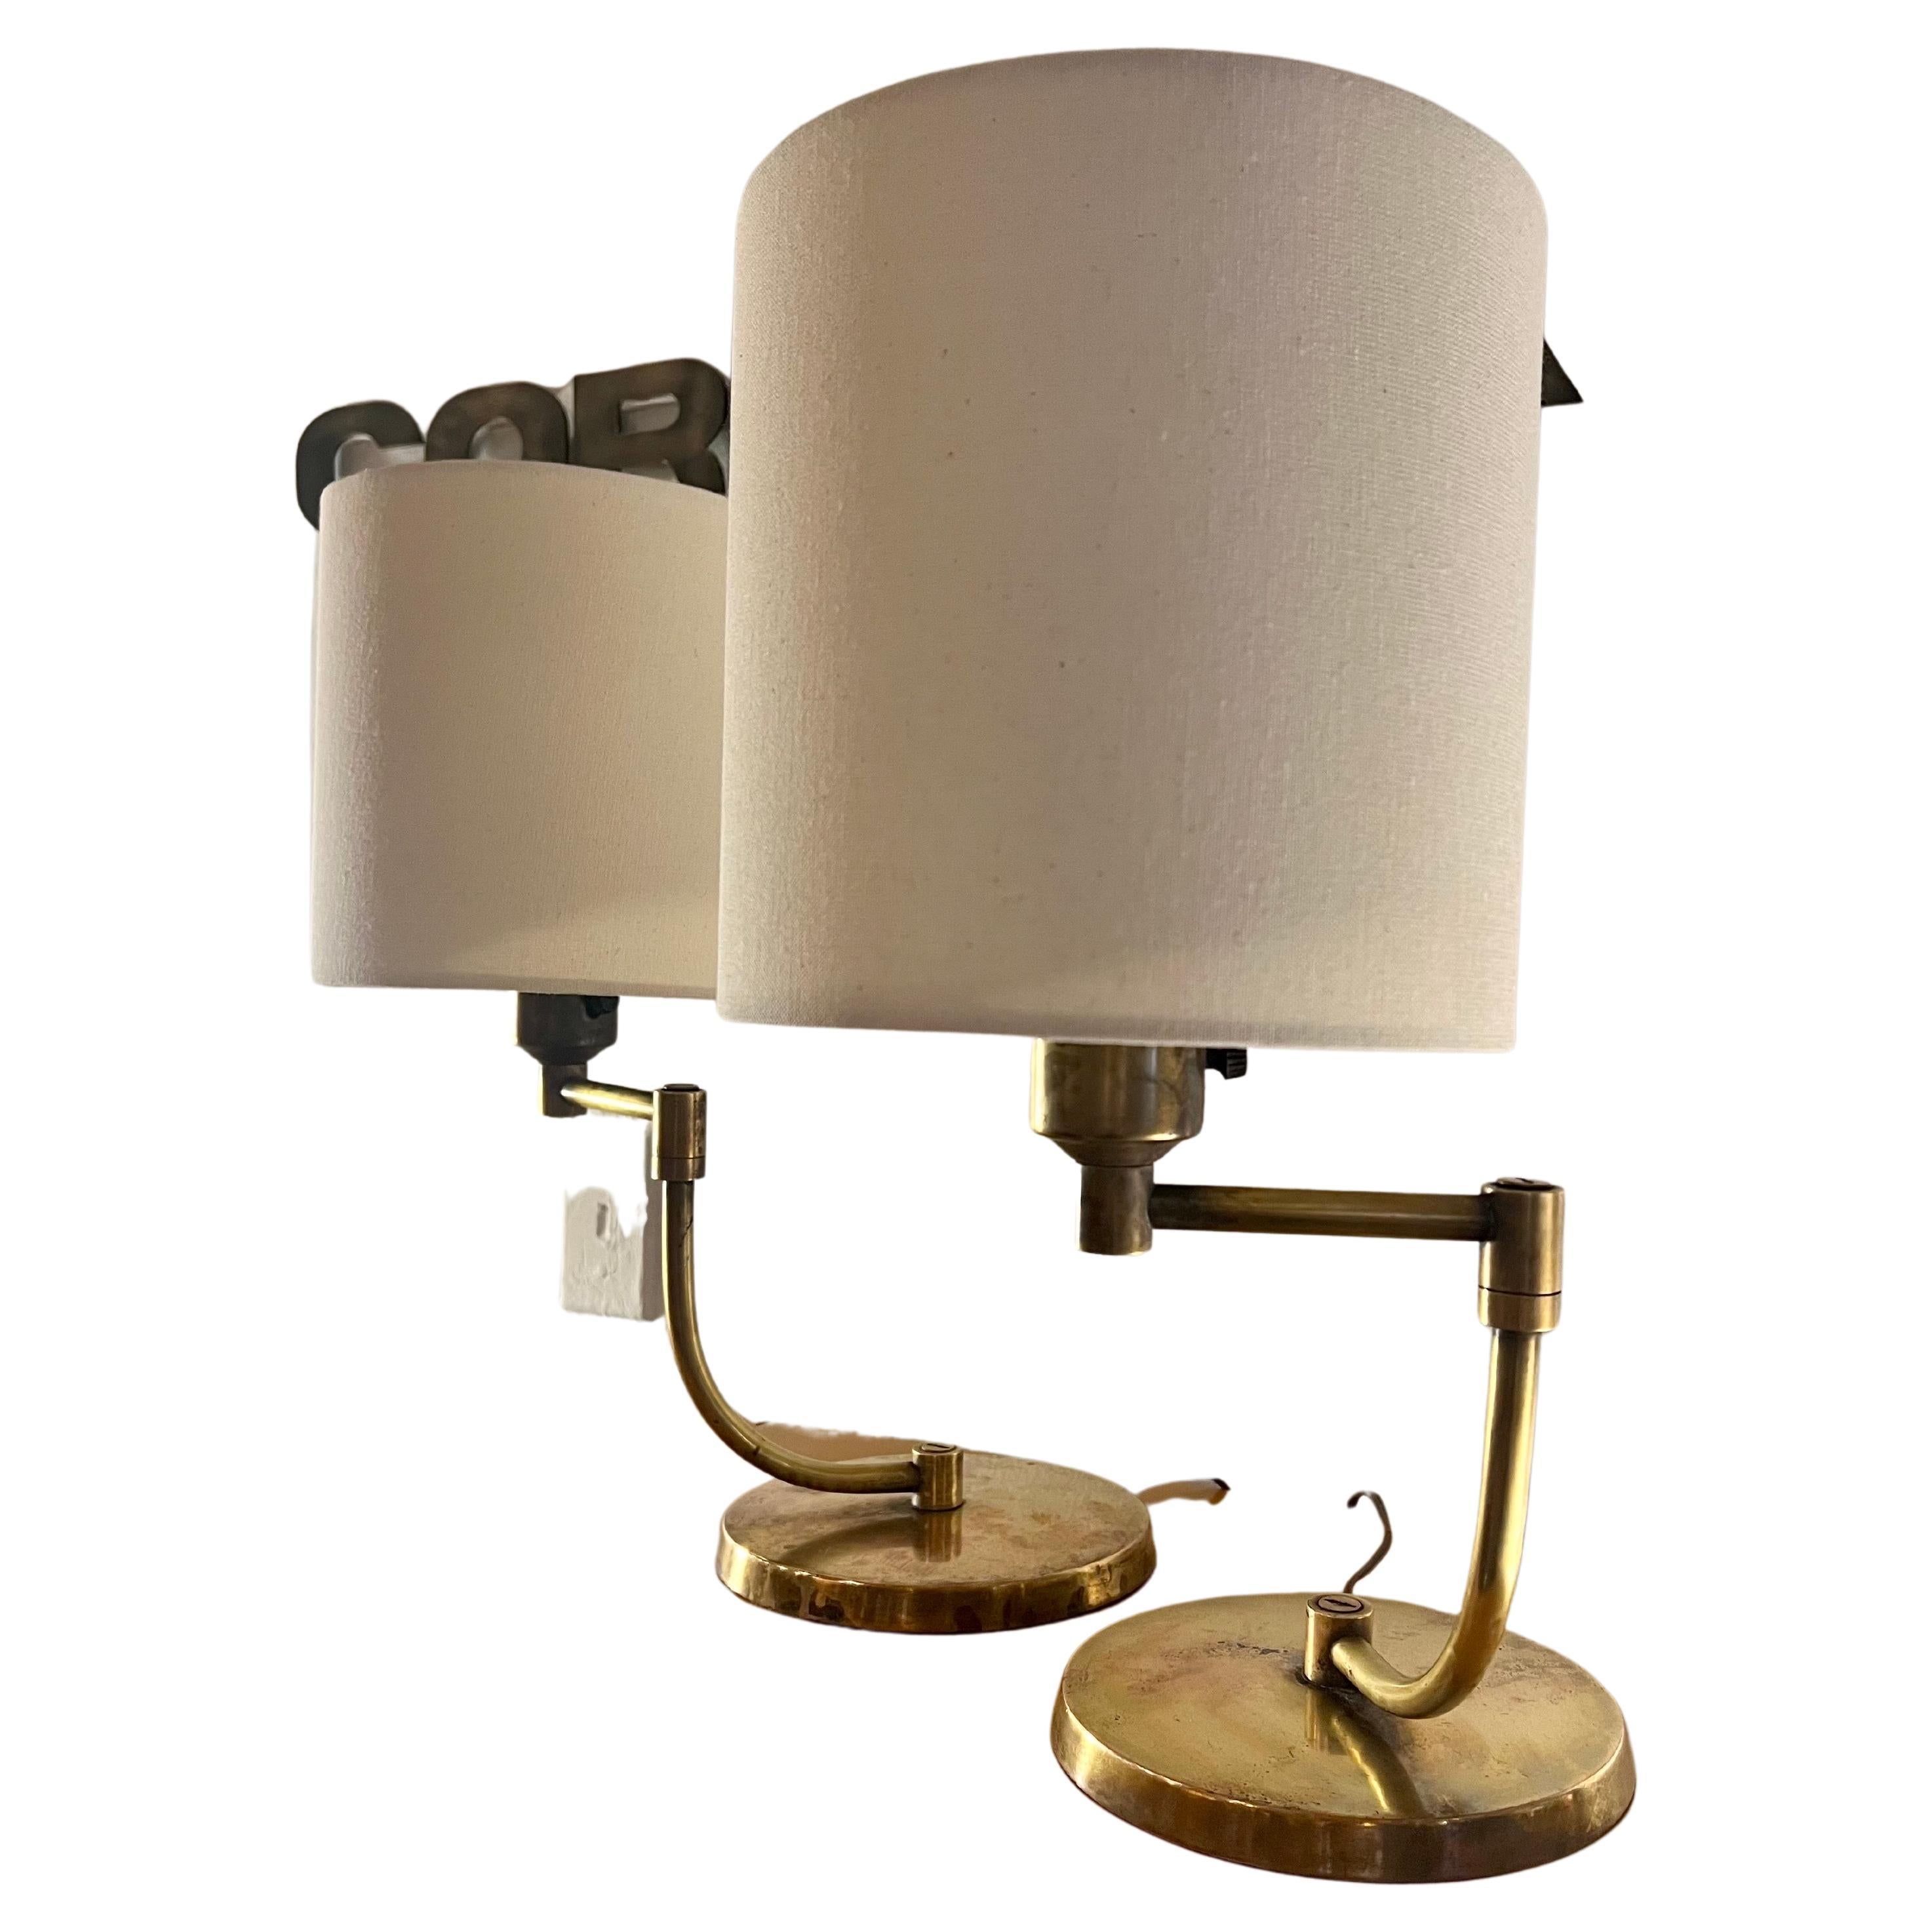 Fantastic Pair of patinated Brass table lamps attributed To Walter Von Nessen, circa 1940's articulated arm that swivels 360 degrees with freshly new redone shades, freshly rewired and left the original glass shades, great style design, and